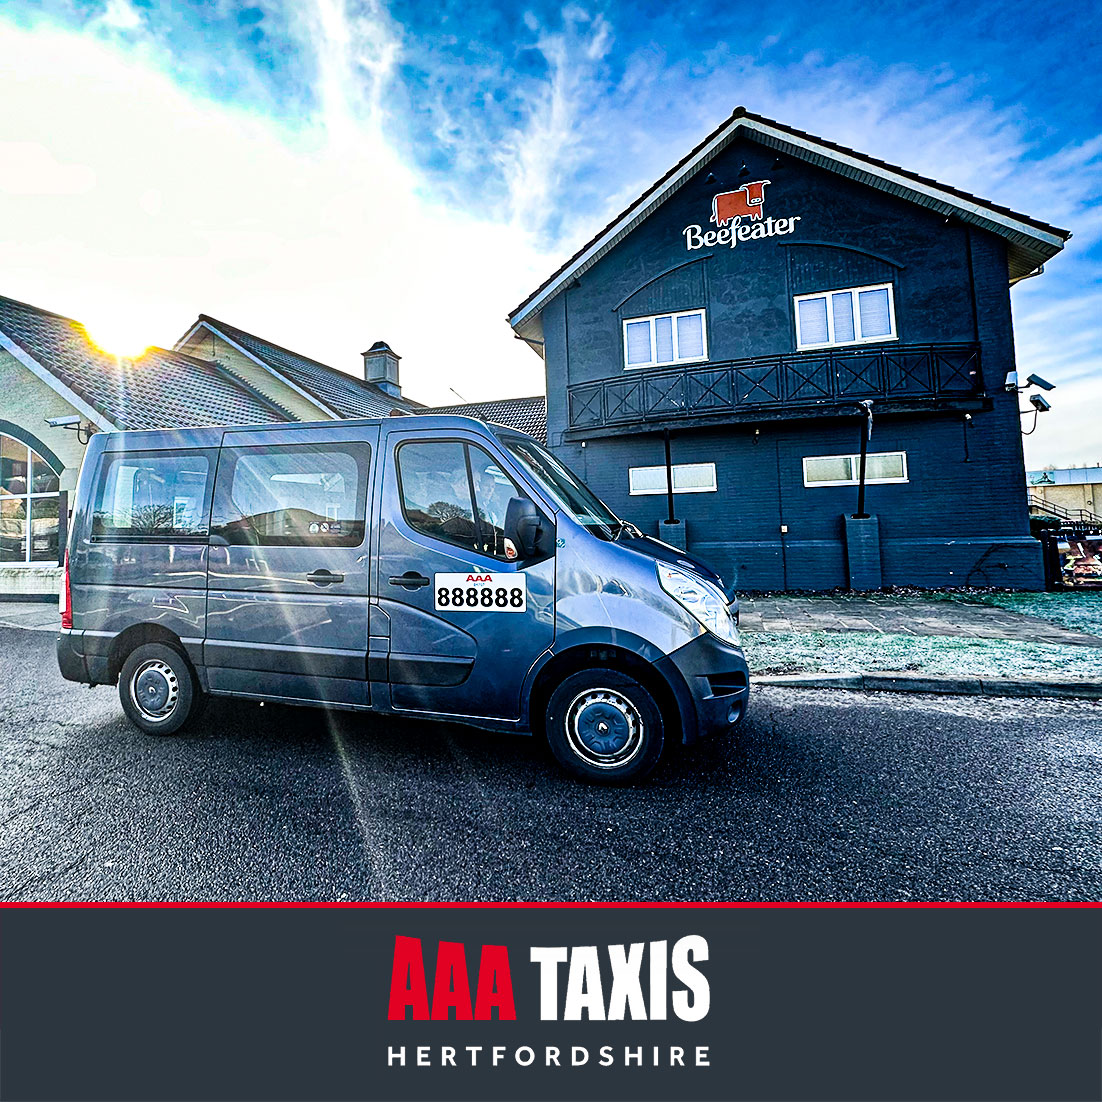 Going out for a meal or to the pub and need a taxi?
Book your AAA Taxi here onelink.to/aaataxis or call us on 01707 888 888.  
#AAAtaxis #Hatfield #WGC #Hertford #Barnet #pottersbar #StAlbans